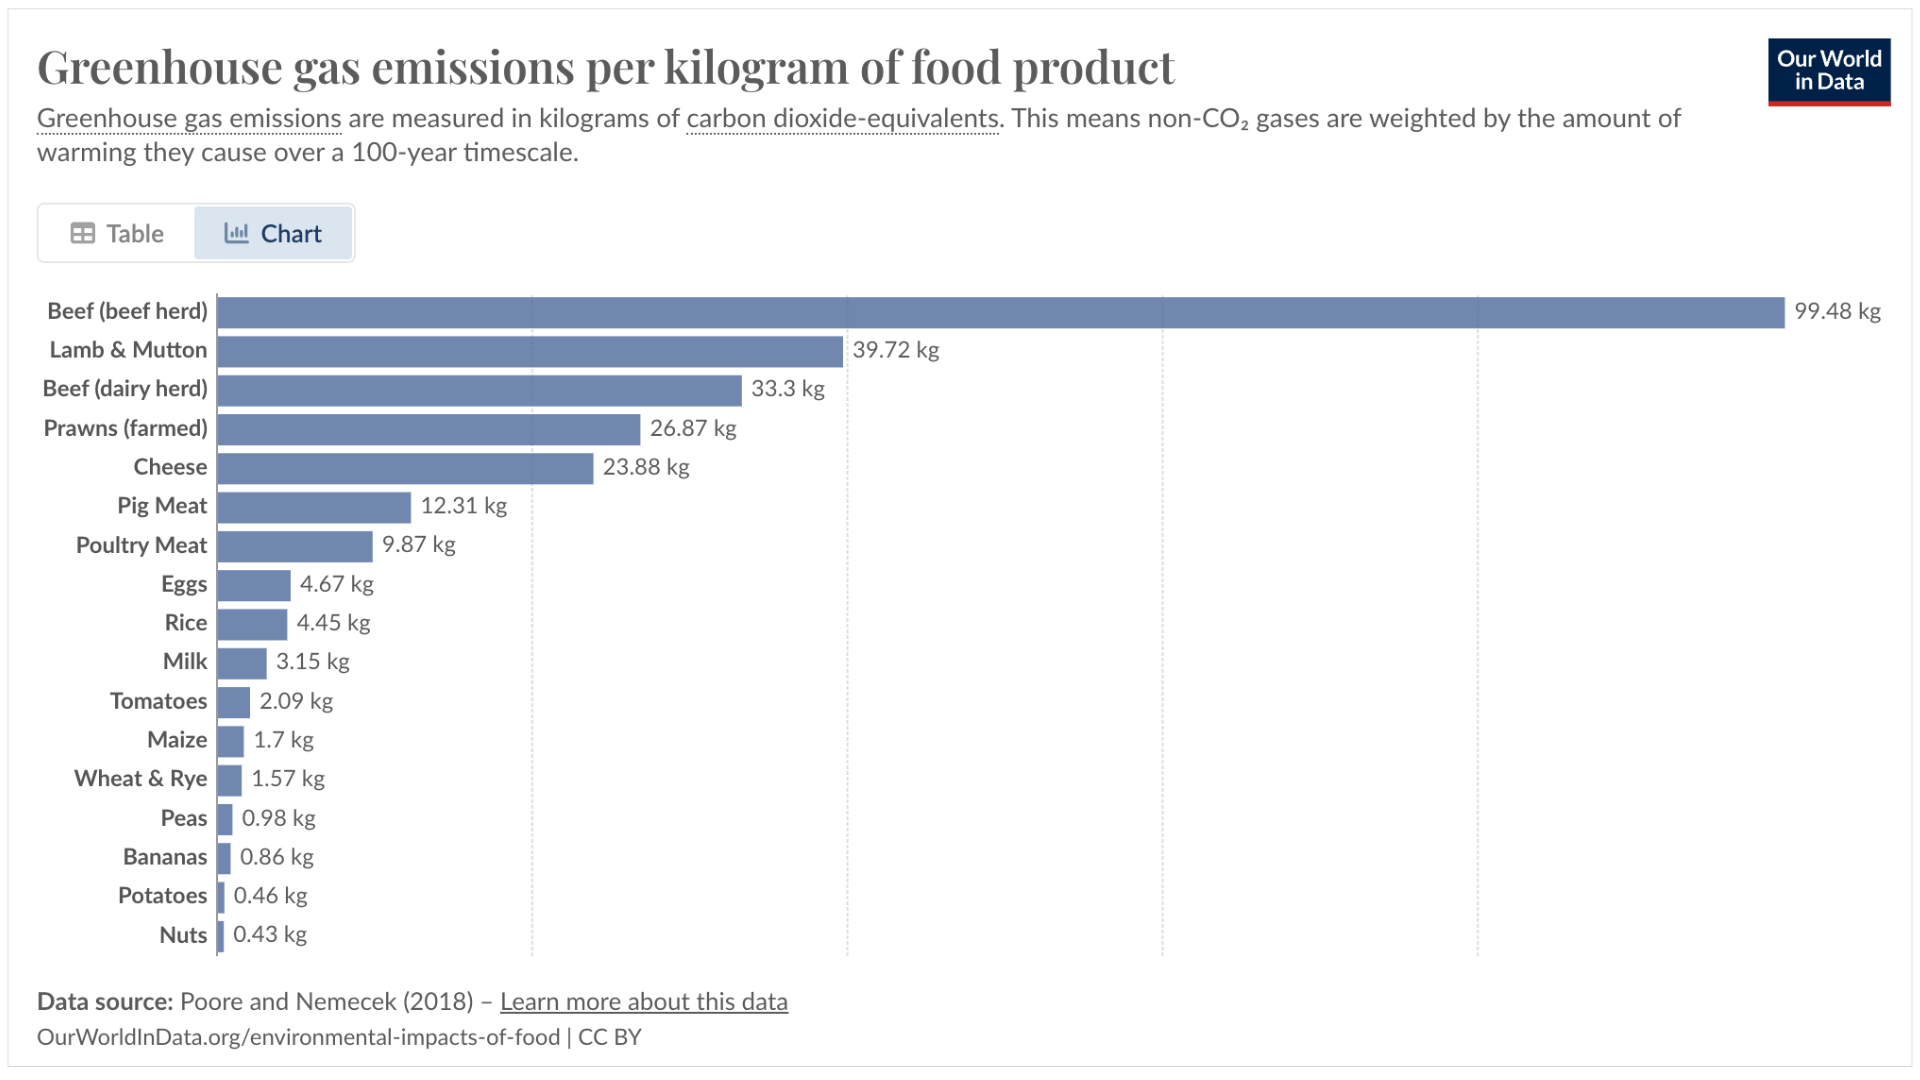 A chart showing the greenhouse gas emissions of various food products. The top 5 food products with the highest greenhouse gas emissions per kilogram of food product are Beef (beef herd), Lamb and mutton, Beef (dairy herd), Prawns (farmed), and Cheese.